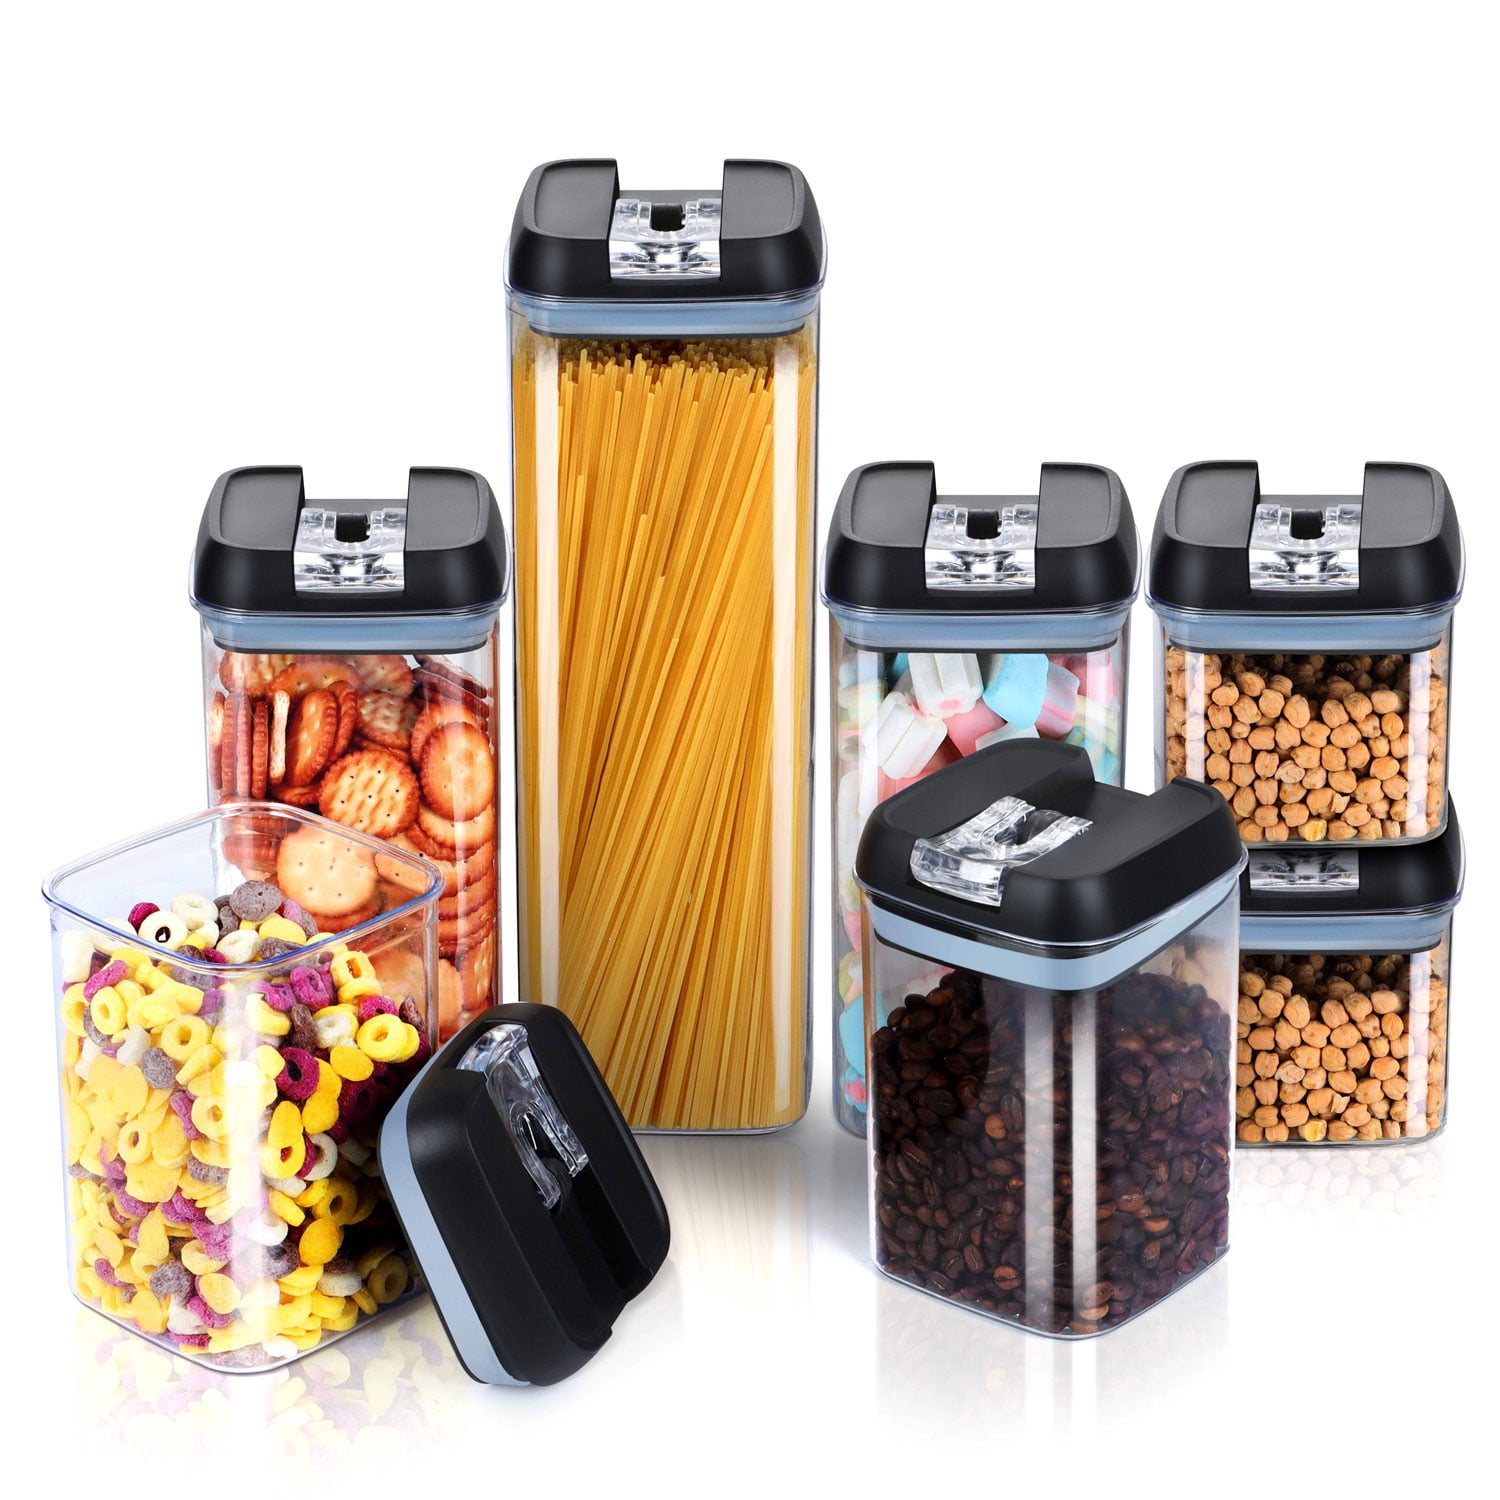 Chef's Path Airtight Food Storage Container Set Round Shape - 7 PC